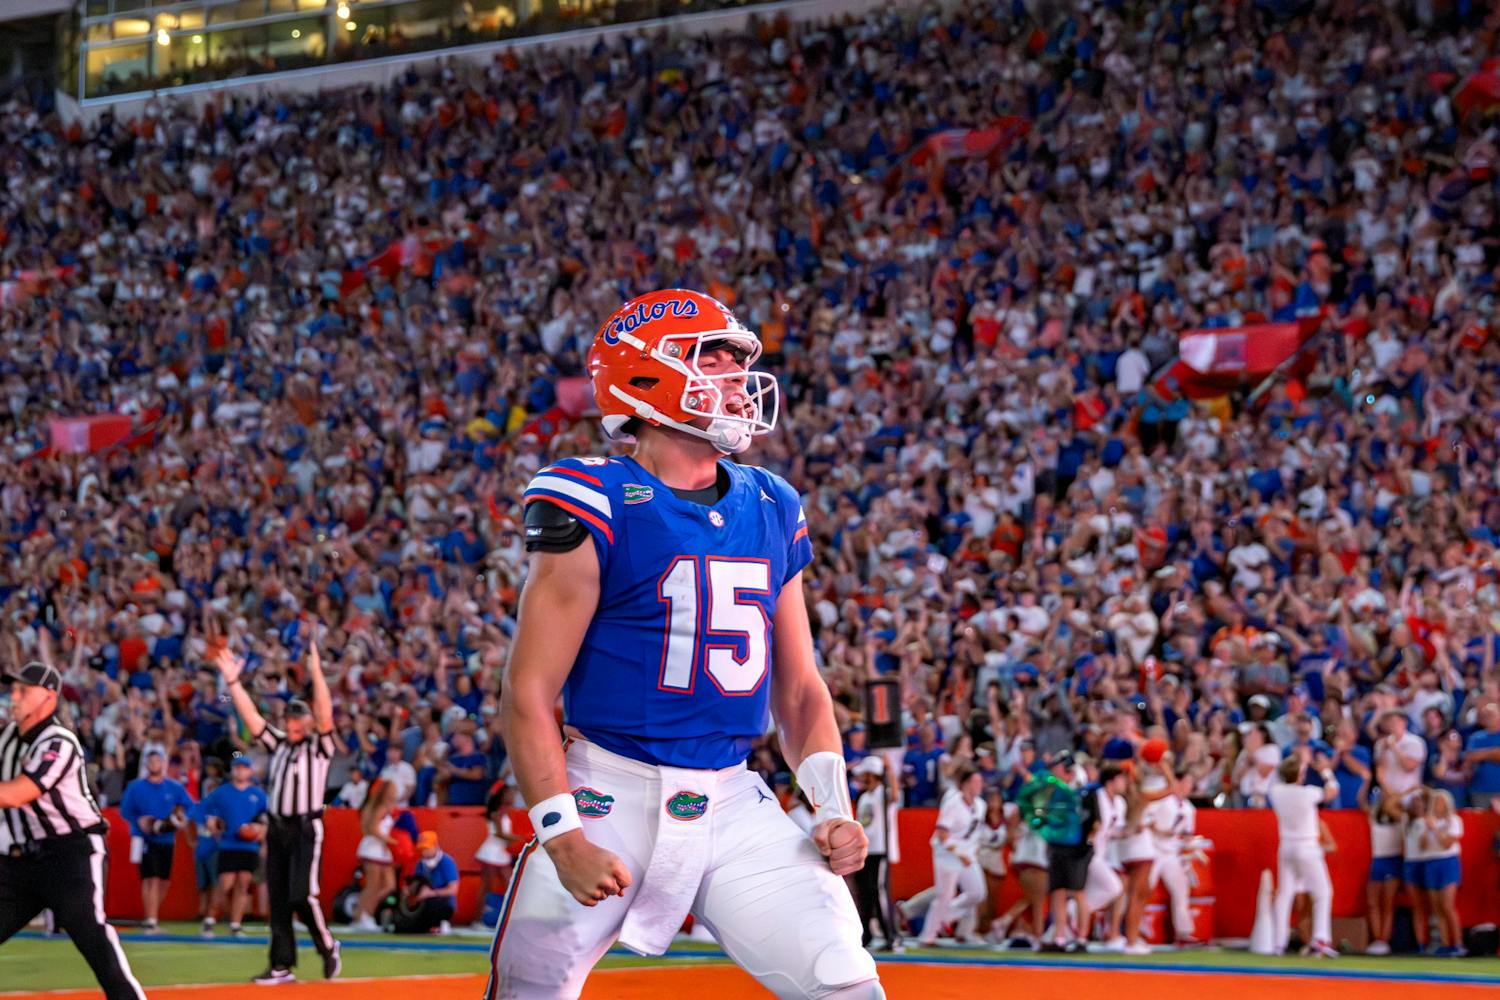 The Florida Gators defeated the McNeese State Cowboys in their first home game of the season in Ben Hill Griffin Stadium Saturday, Sept. 9, 2023.